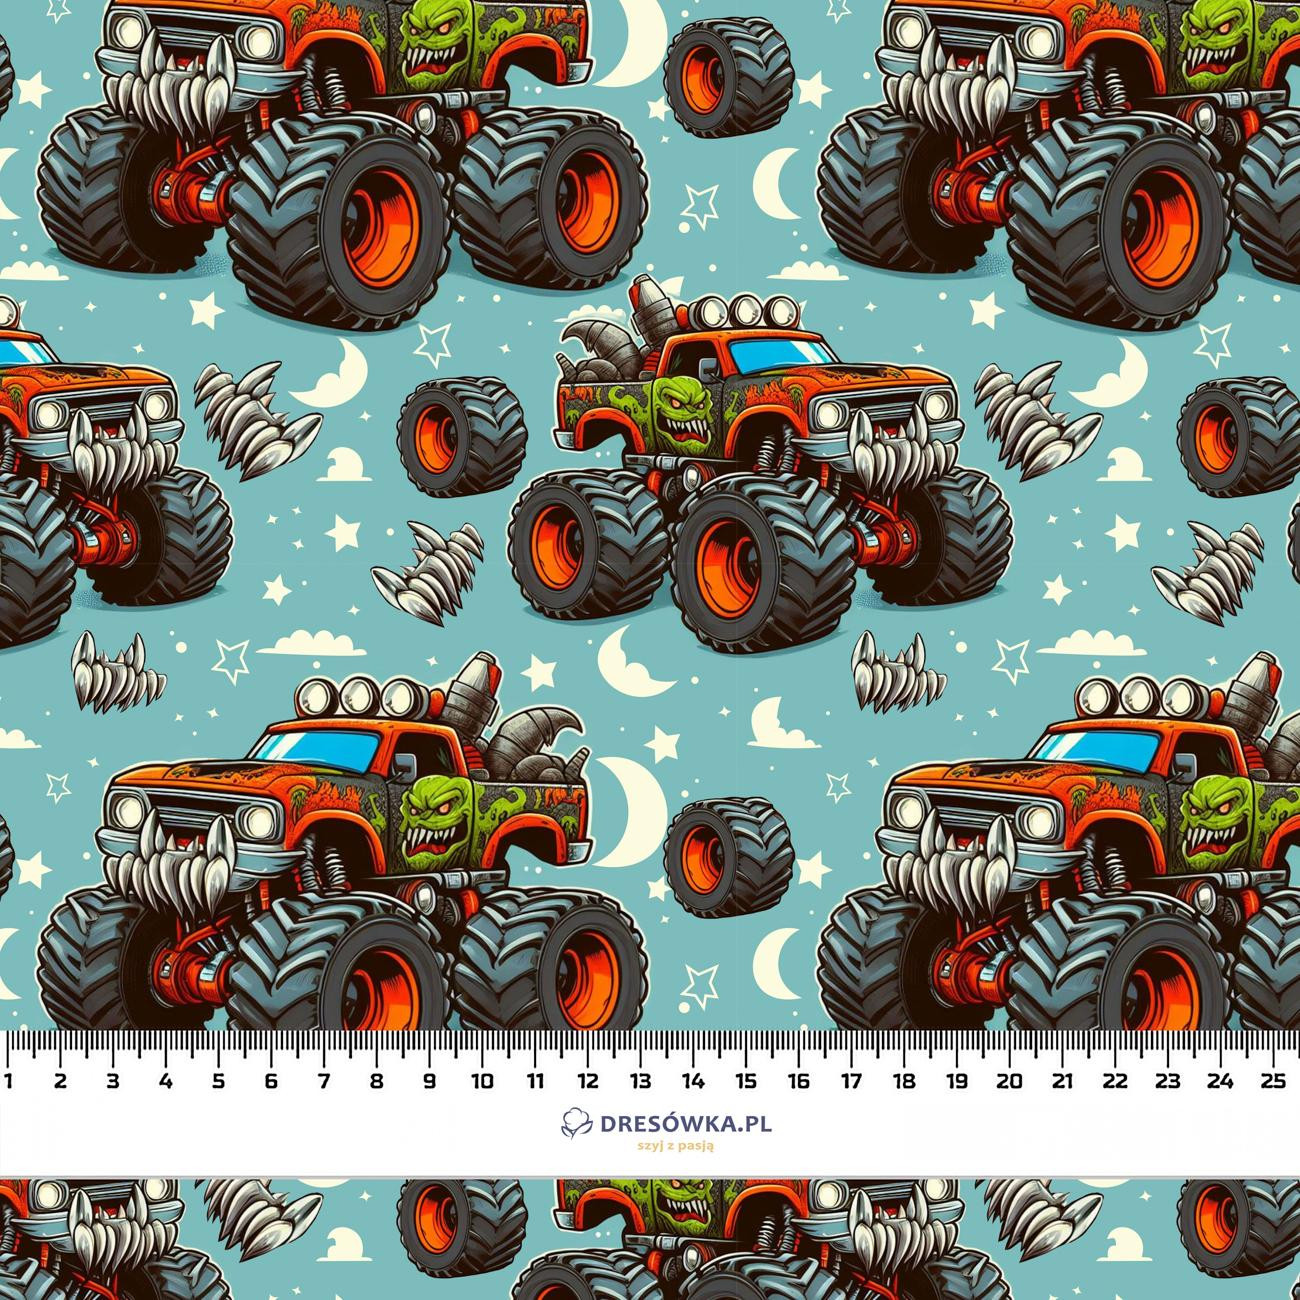 MONSTER TRUCK PAT. 1 - quick-drying woven fabric